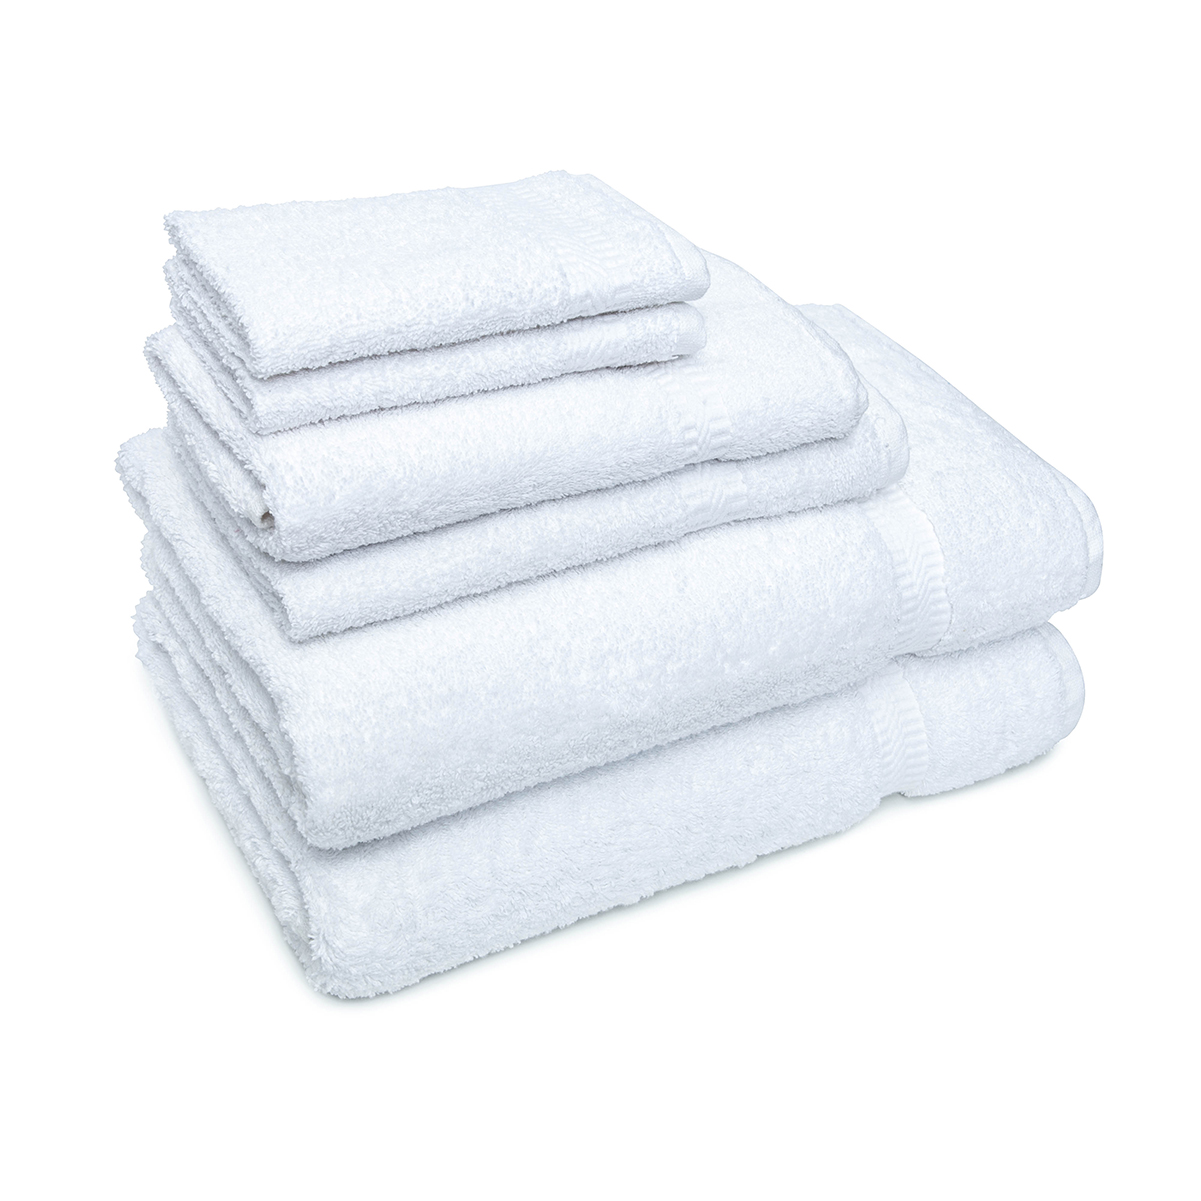 Plush Hotel Towels by ADI Questions & Answers